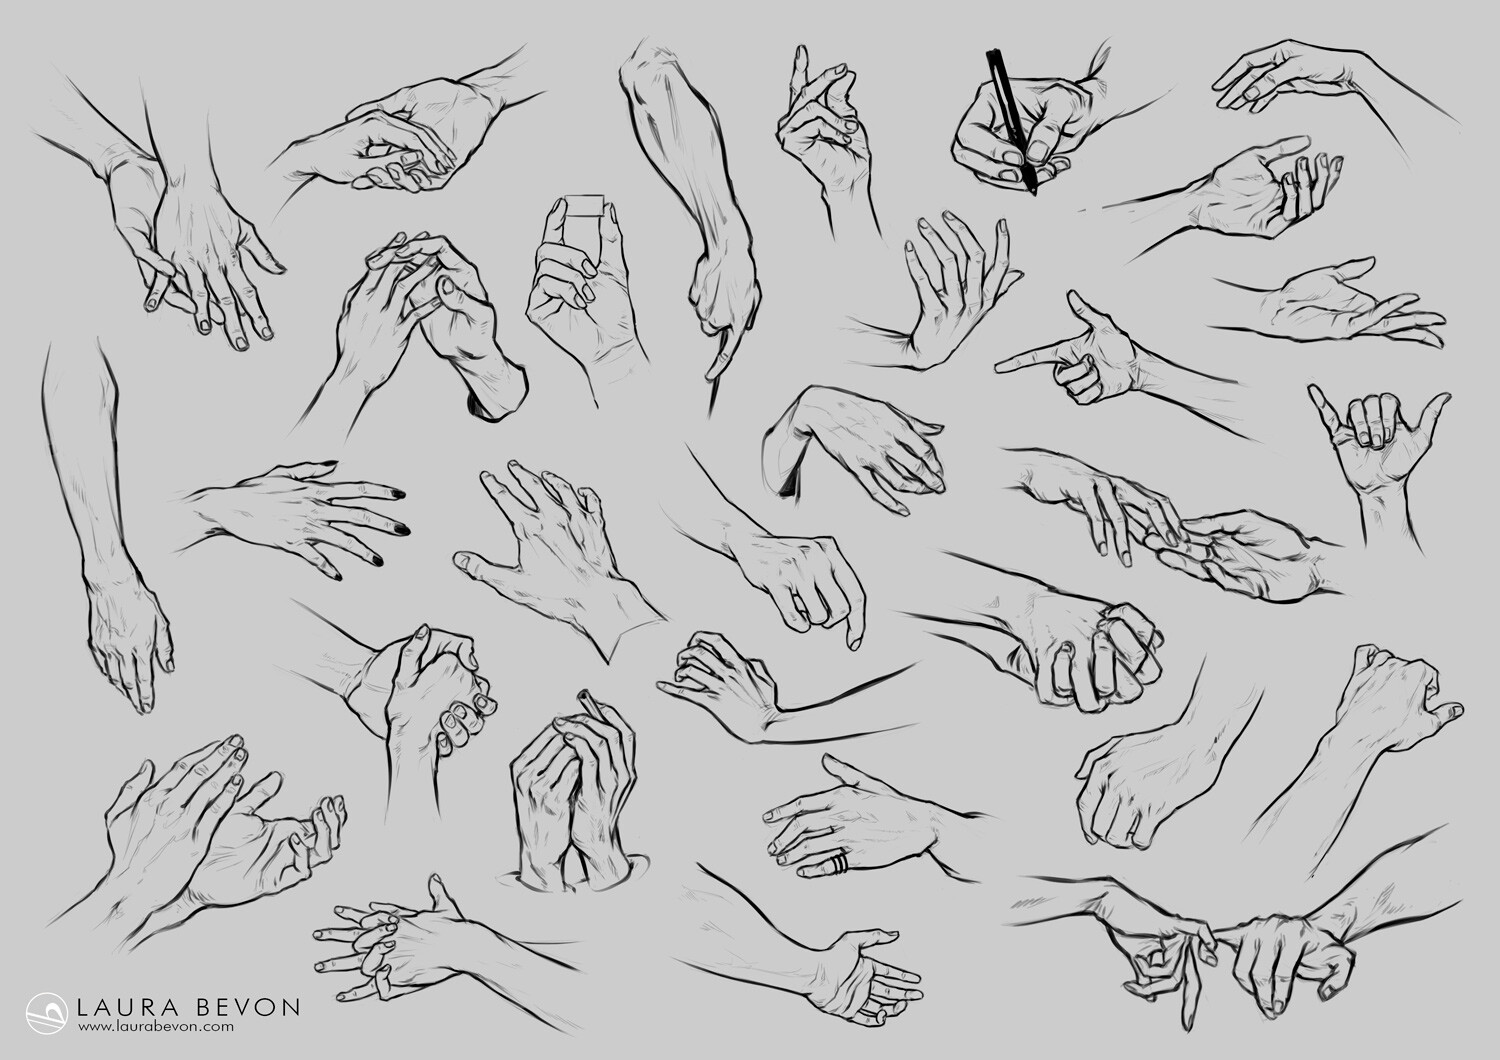 Share 73 Anime Hand Sketches Best Vn